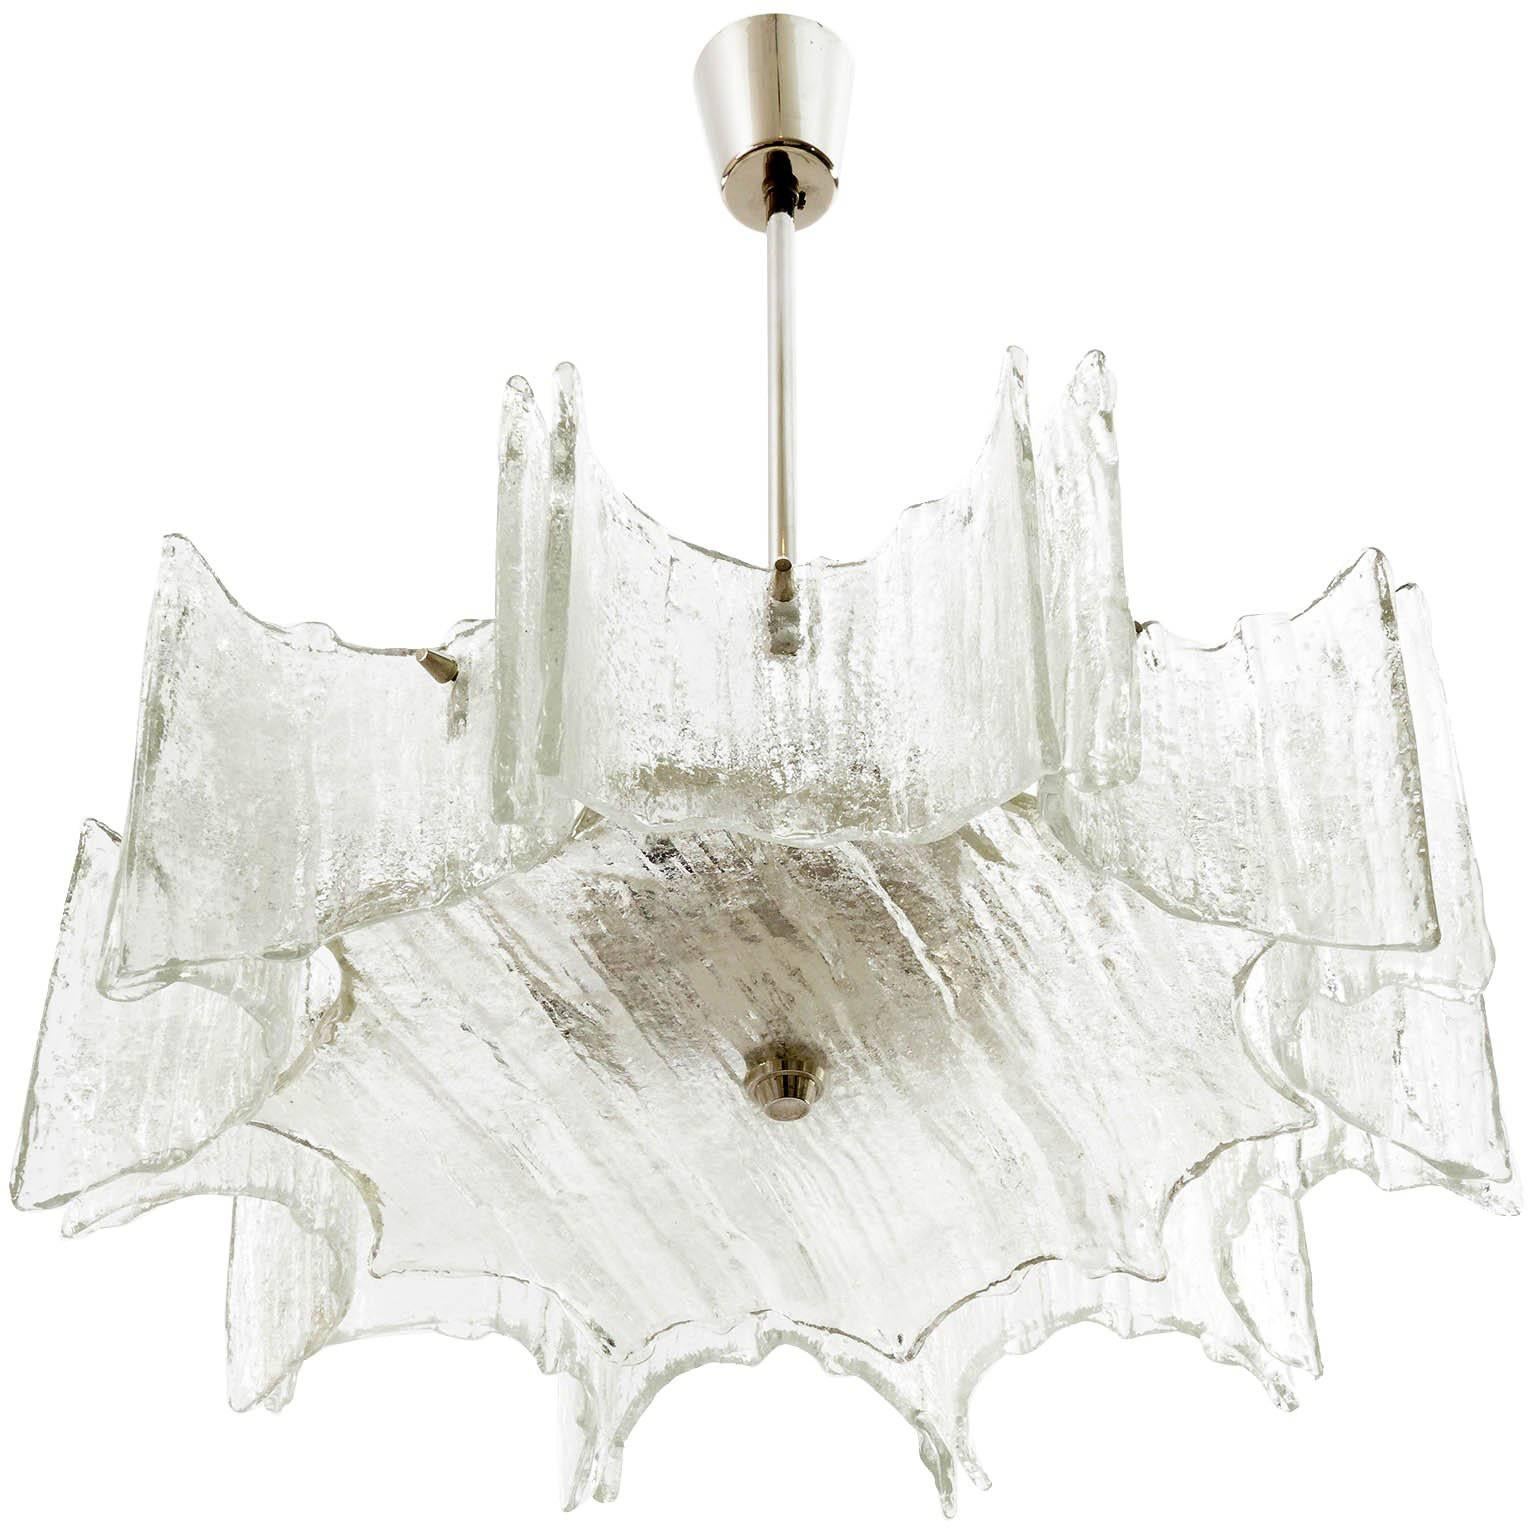 A pair of star shaped ceiling lights by Kalmar manufactured in Austria in midcentury, circa 1970 (late 1960s or early 1970s).
They are made of frosted ice glass pieces mounted on a white lacquered frame and a nickel-plated brass stem and canopy.
The